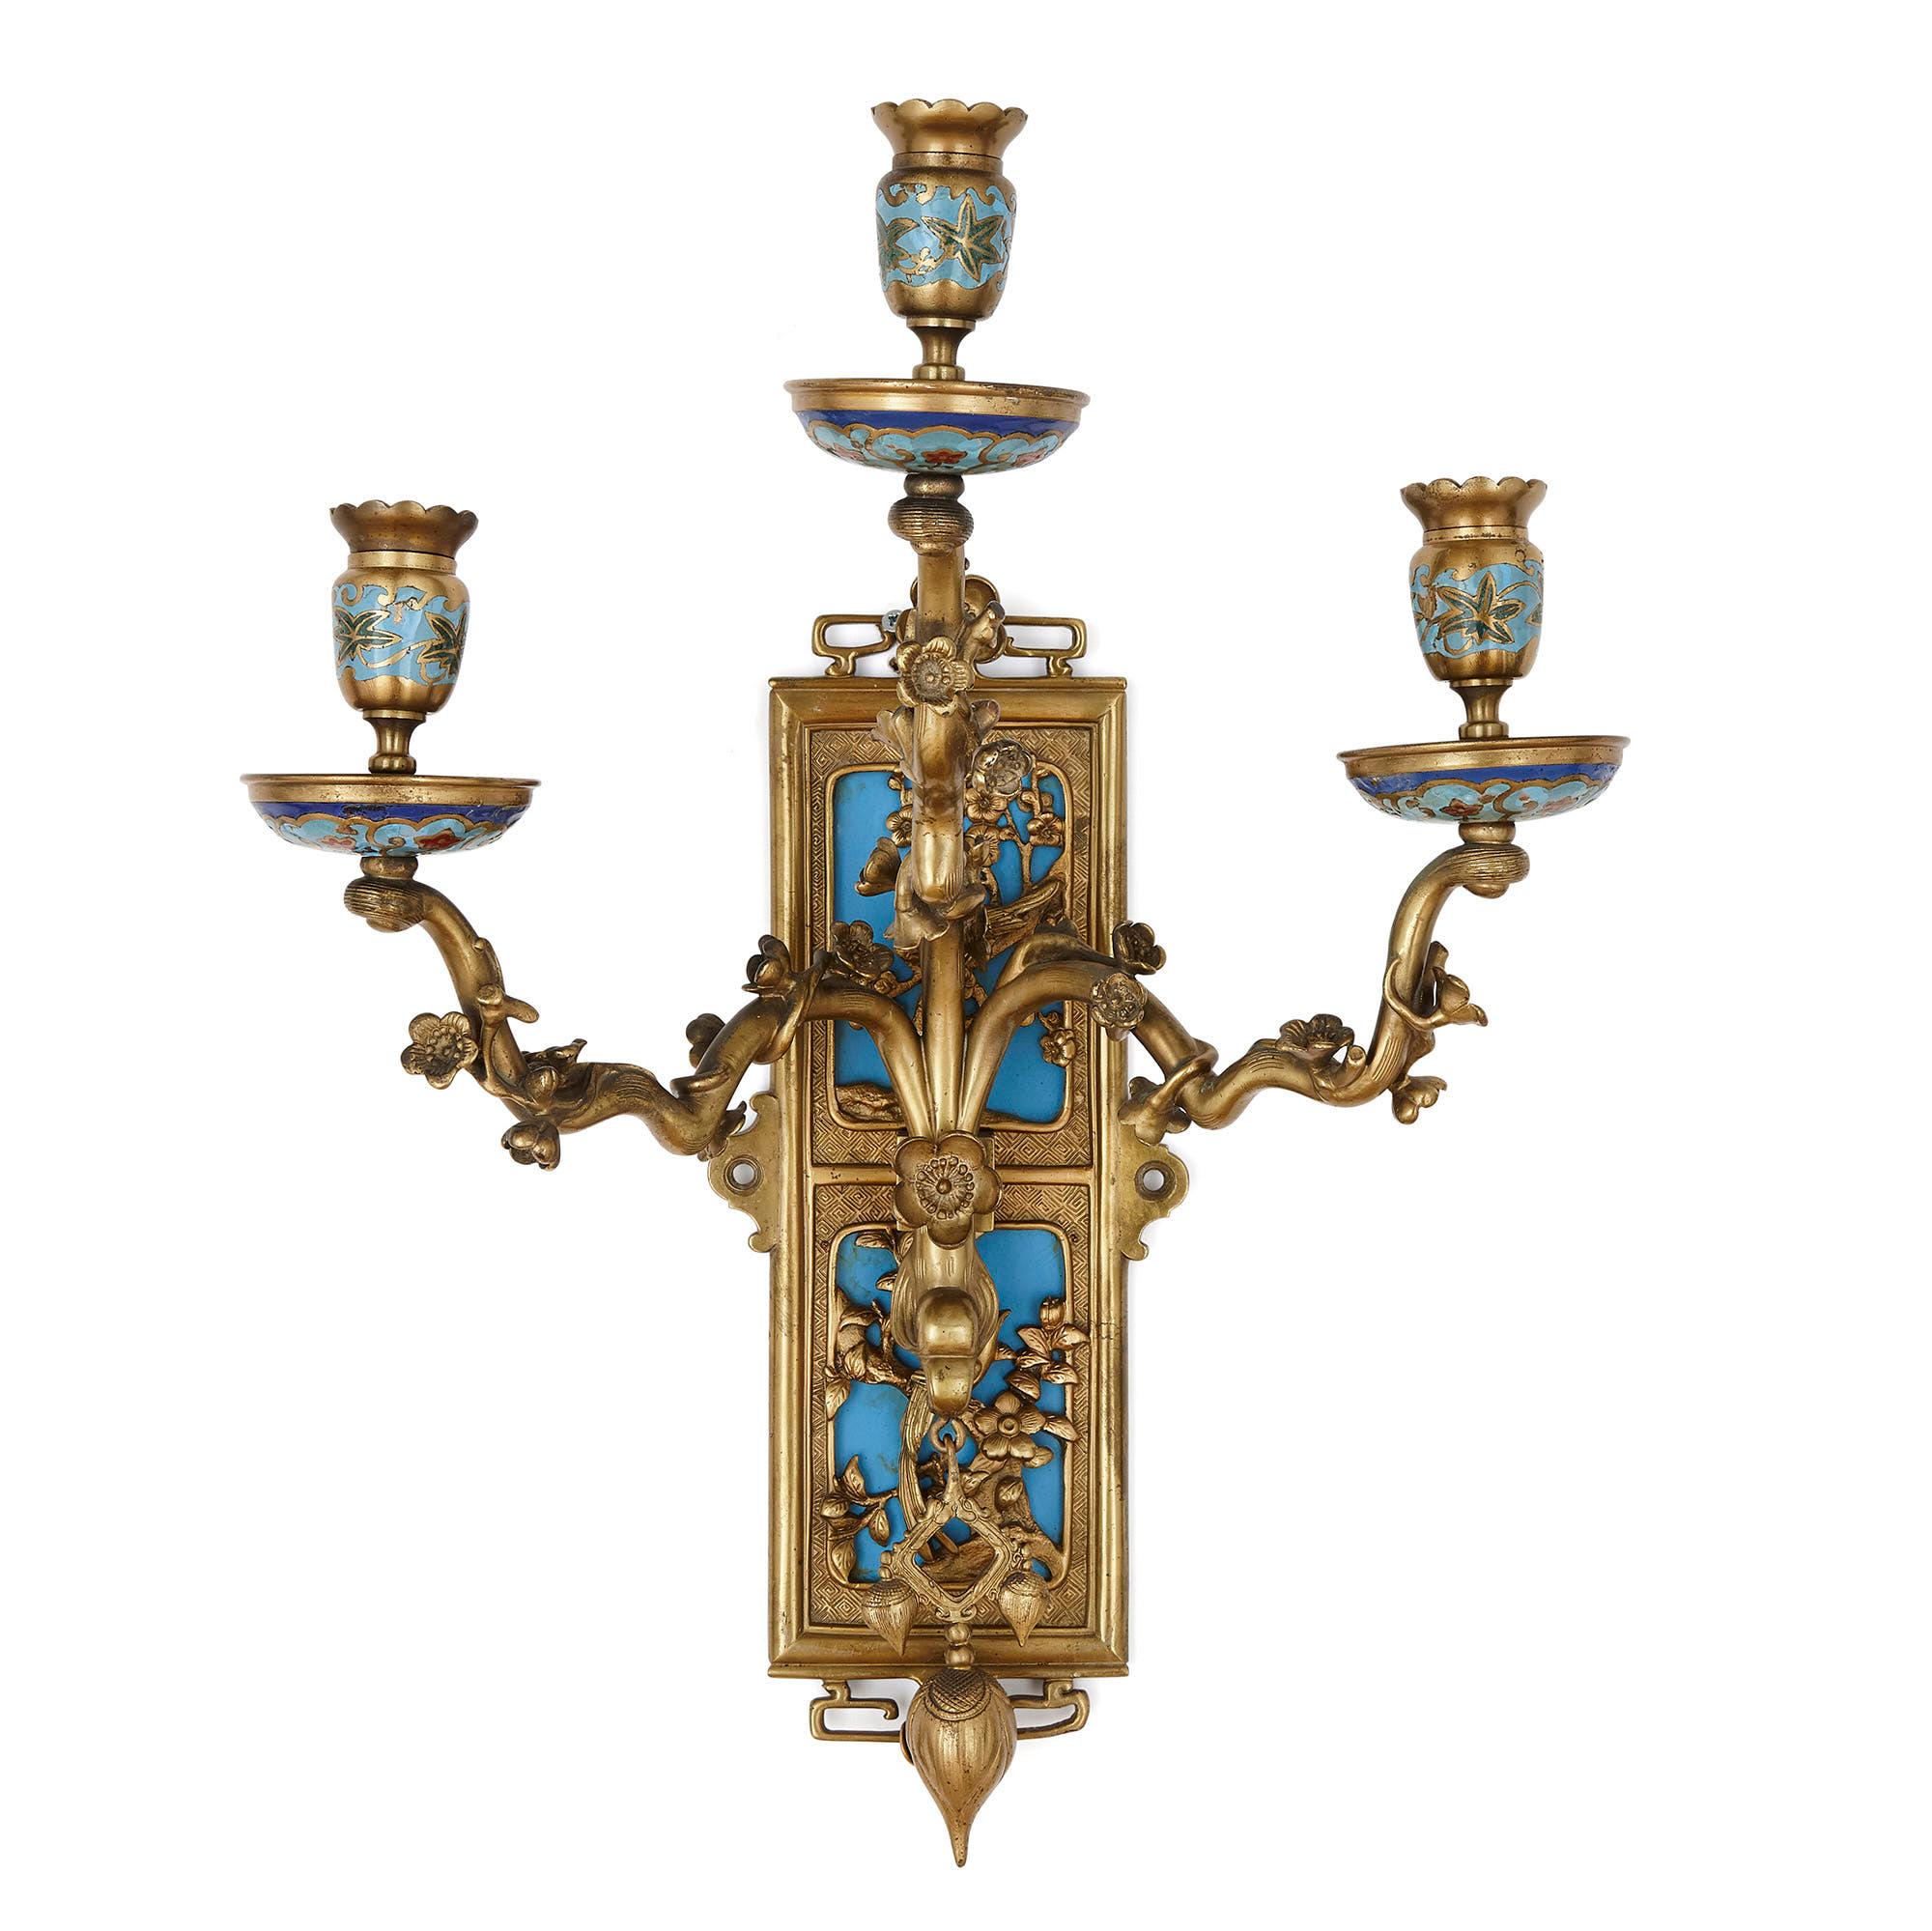 Pair of gilt bronze and enamel sconces in the Japonisme style
French, late 19th century
Measures: Height 48cm, width 38cm, depth 22cm

The sconces, or wall lights, in this pair are designed in the Japanese manner, the style—known as